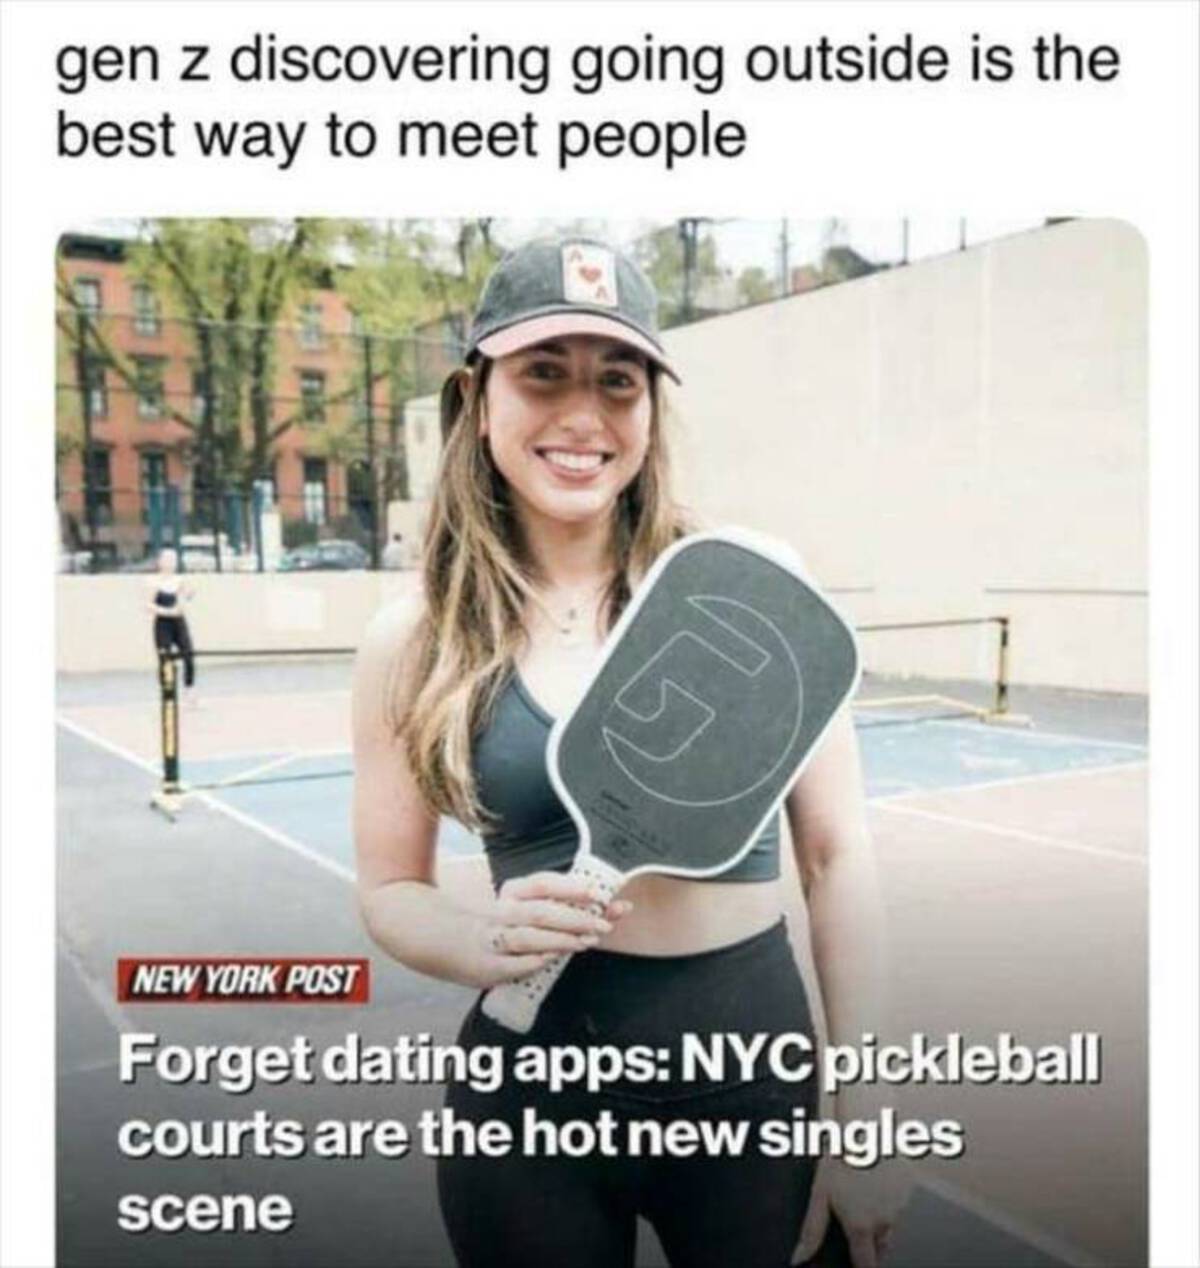 sara buffone - gen z discovering going outside is the best way to meet people New York Post Forget dating apps Nyc pickleball courts are the hot new singles scene